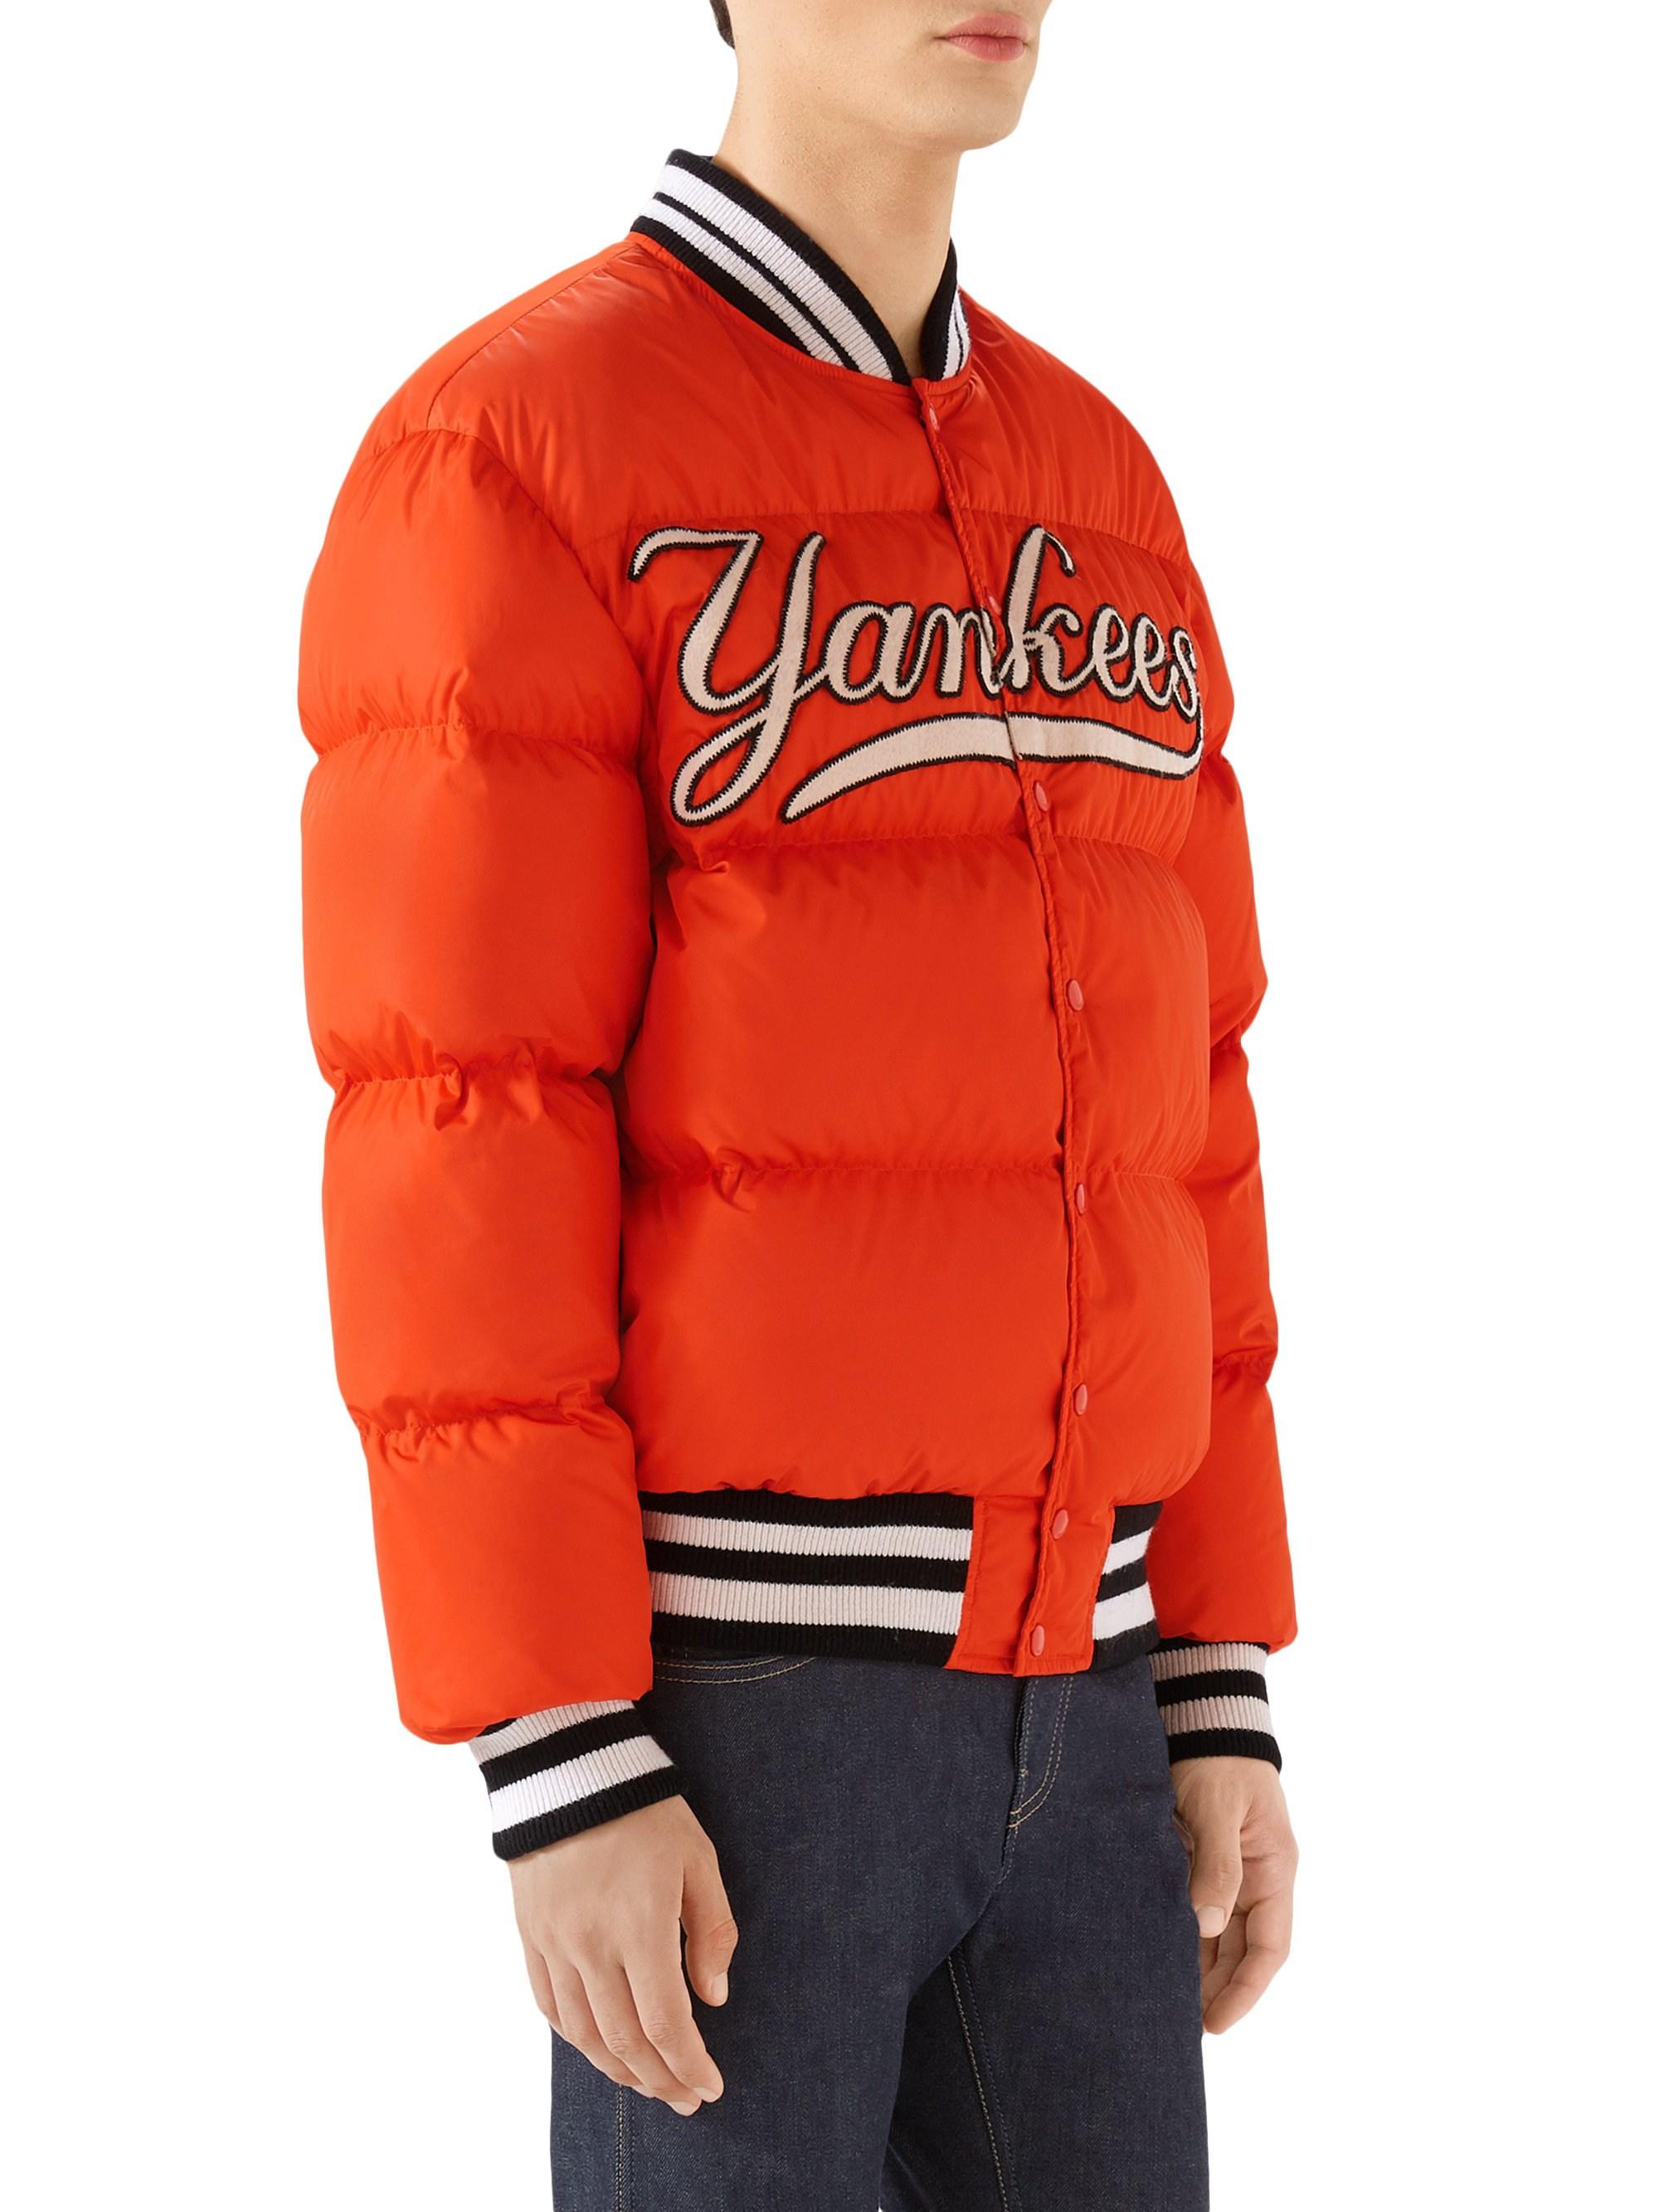 Gucci Men's Bomber Jacket With Ny Yankeestm Patch in Yellow & Orange ...